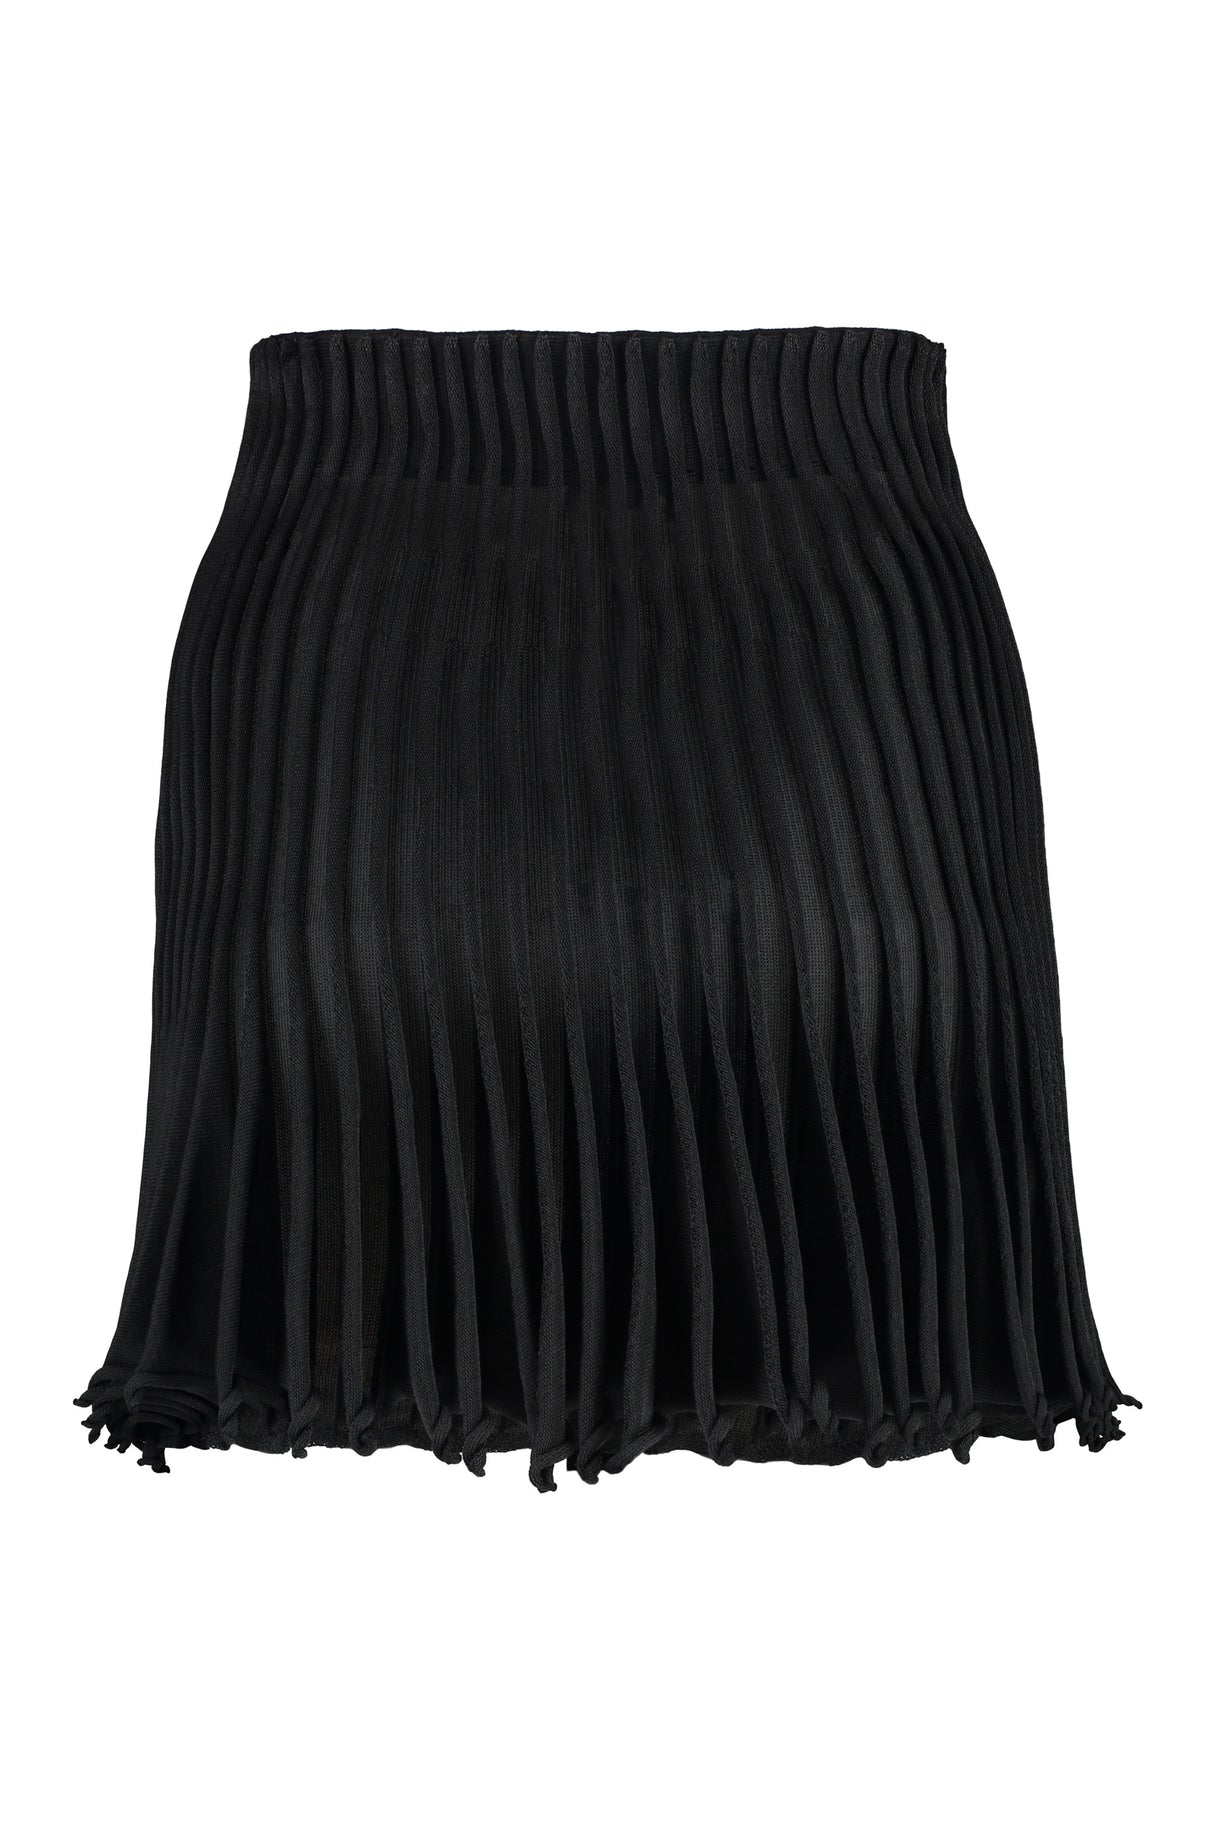 ALAIA Black Pleated Knit Skirt for Women